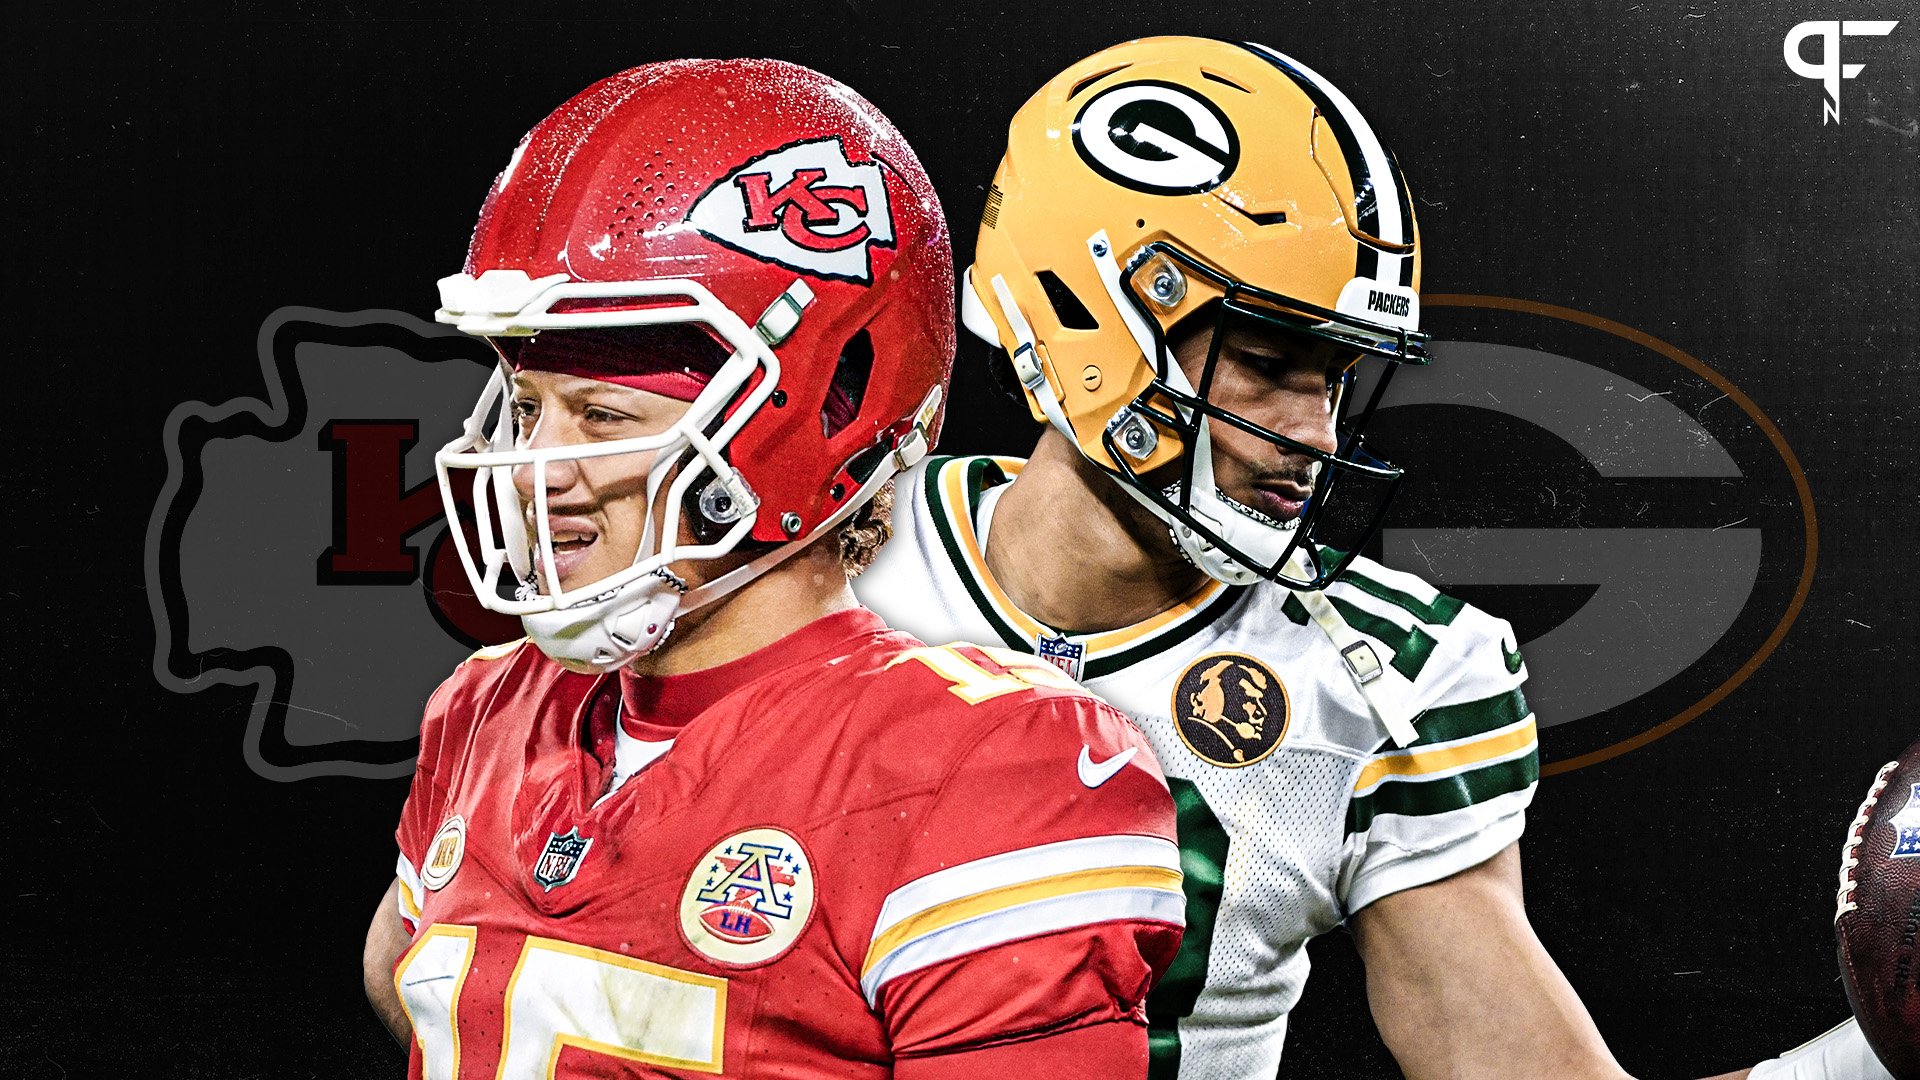 Chiefs vs. Packers Predictions and Expert Picks Against the Spread: Patrick Mahomes or Jordan Love as a Home Underdog?